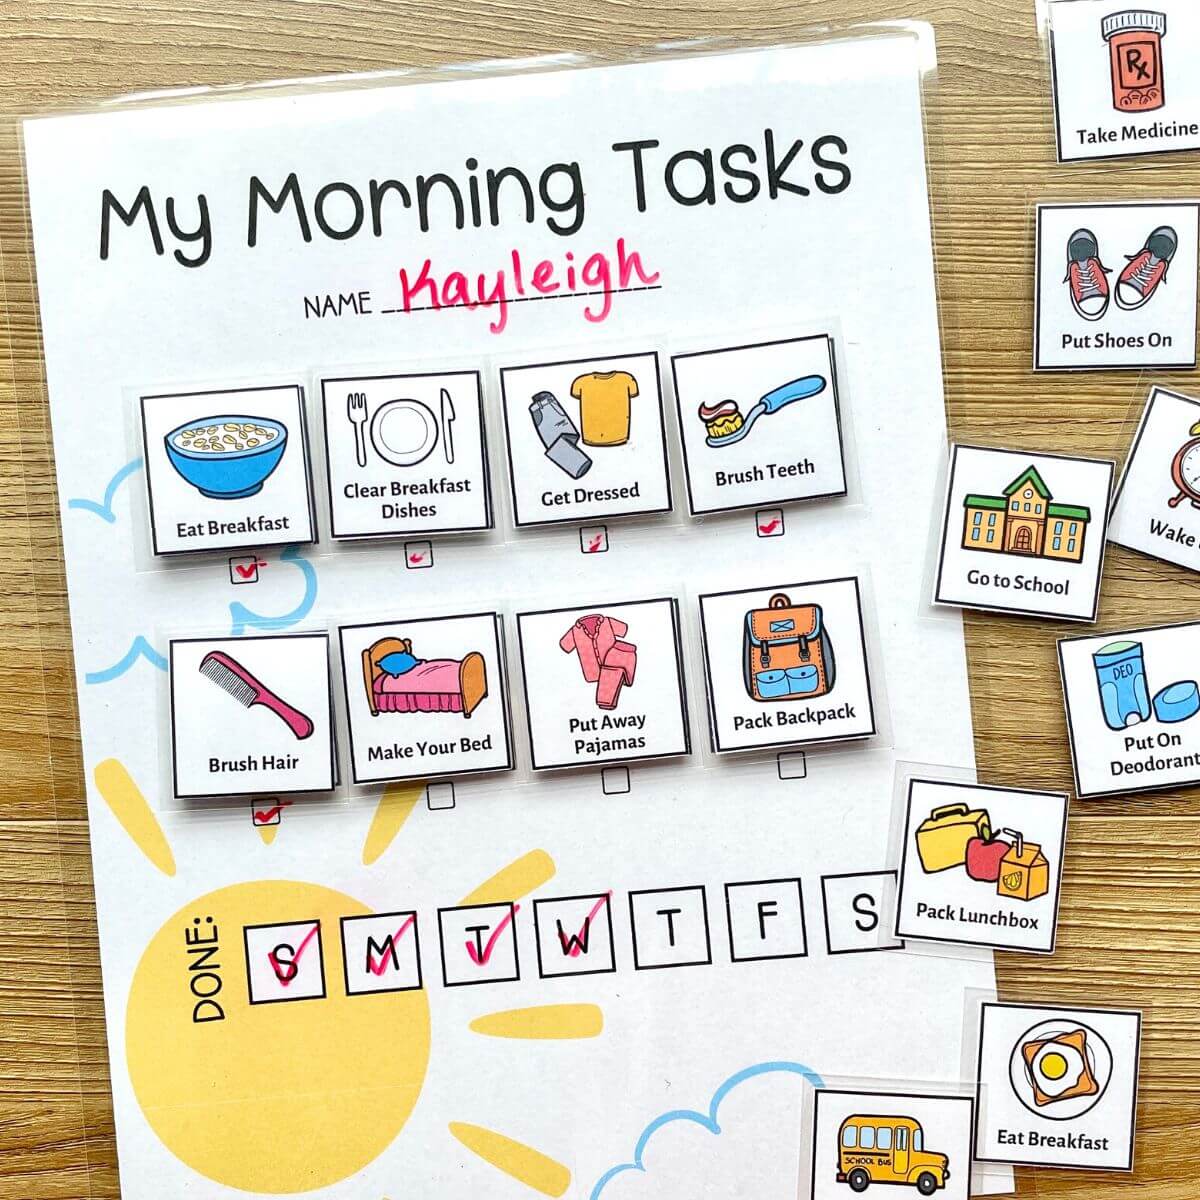 Back to school means back to busy morning routines - make sure to